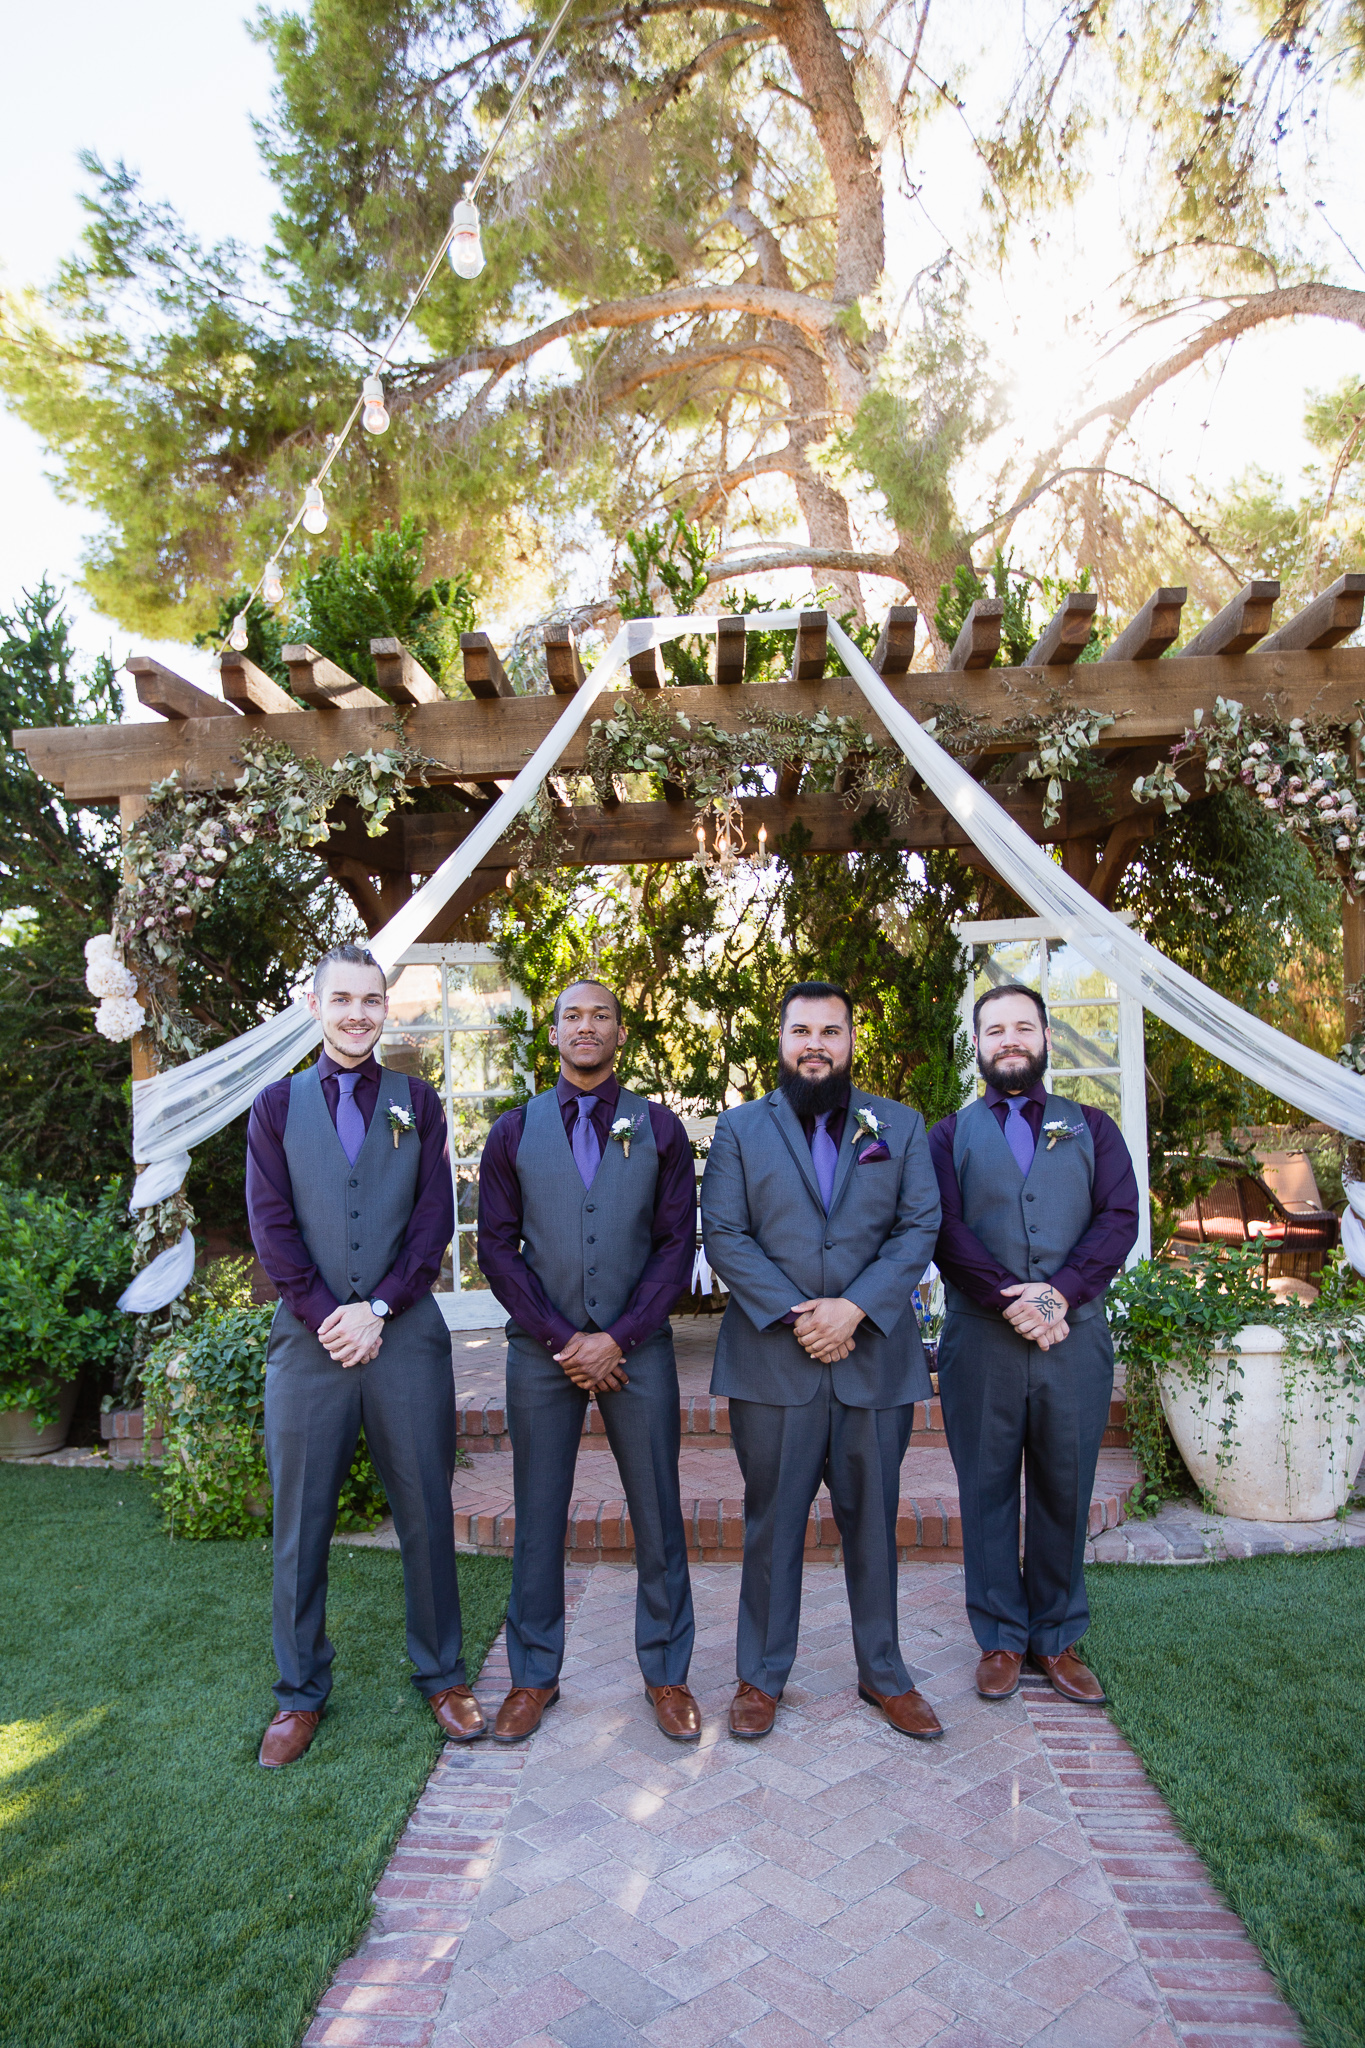 Groom with groomsmen in purple and grey suite at Schnepf Farms by Phoenix wedding photographer PMA Photography.